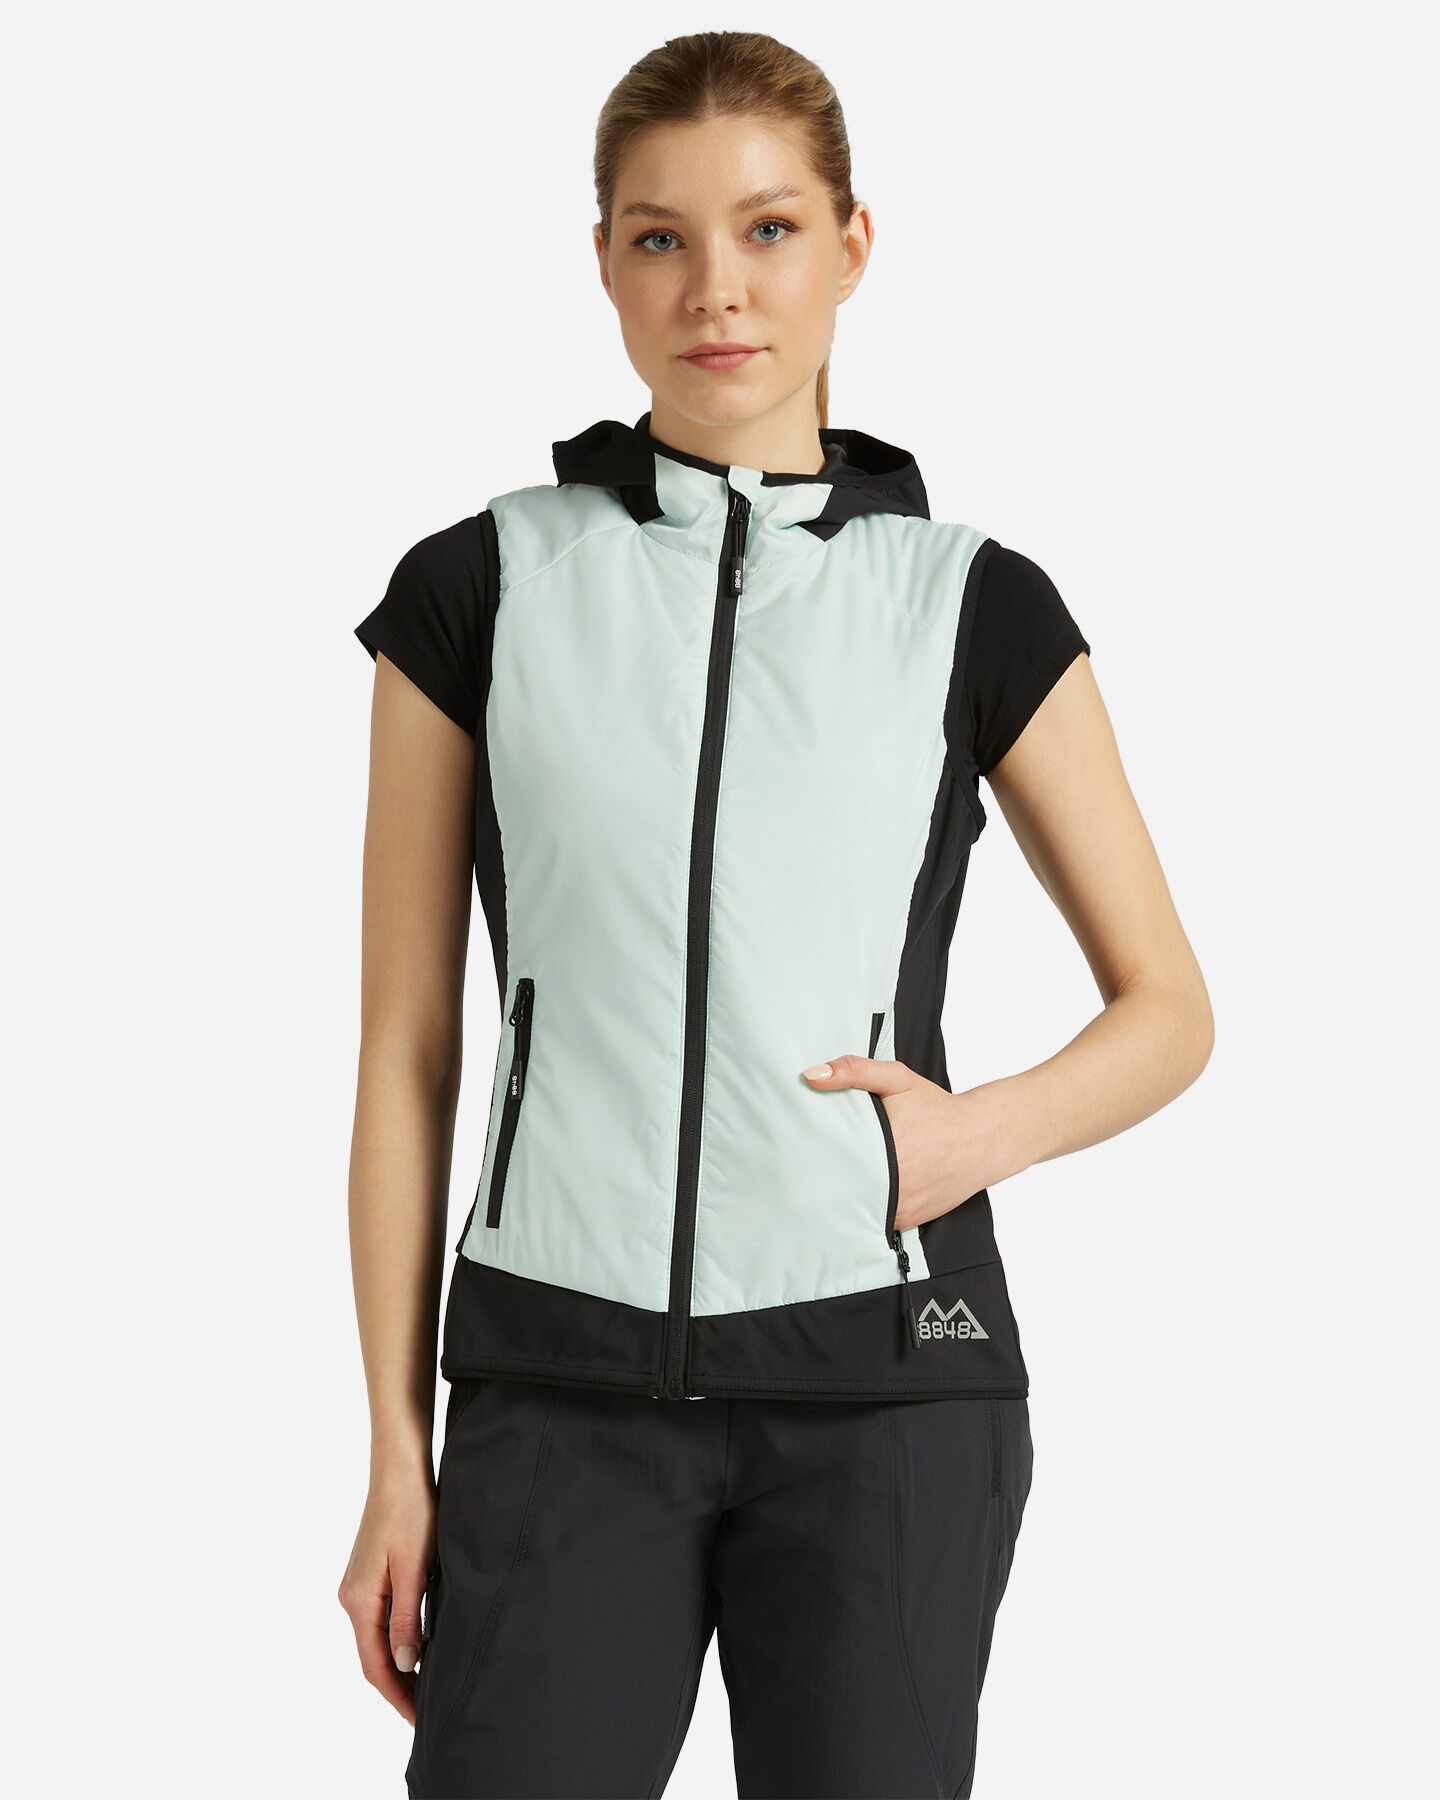  Gilet 8848 MOUNTAIN HIKE W S4120774|1143/050|S scatto 0